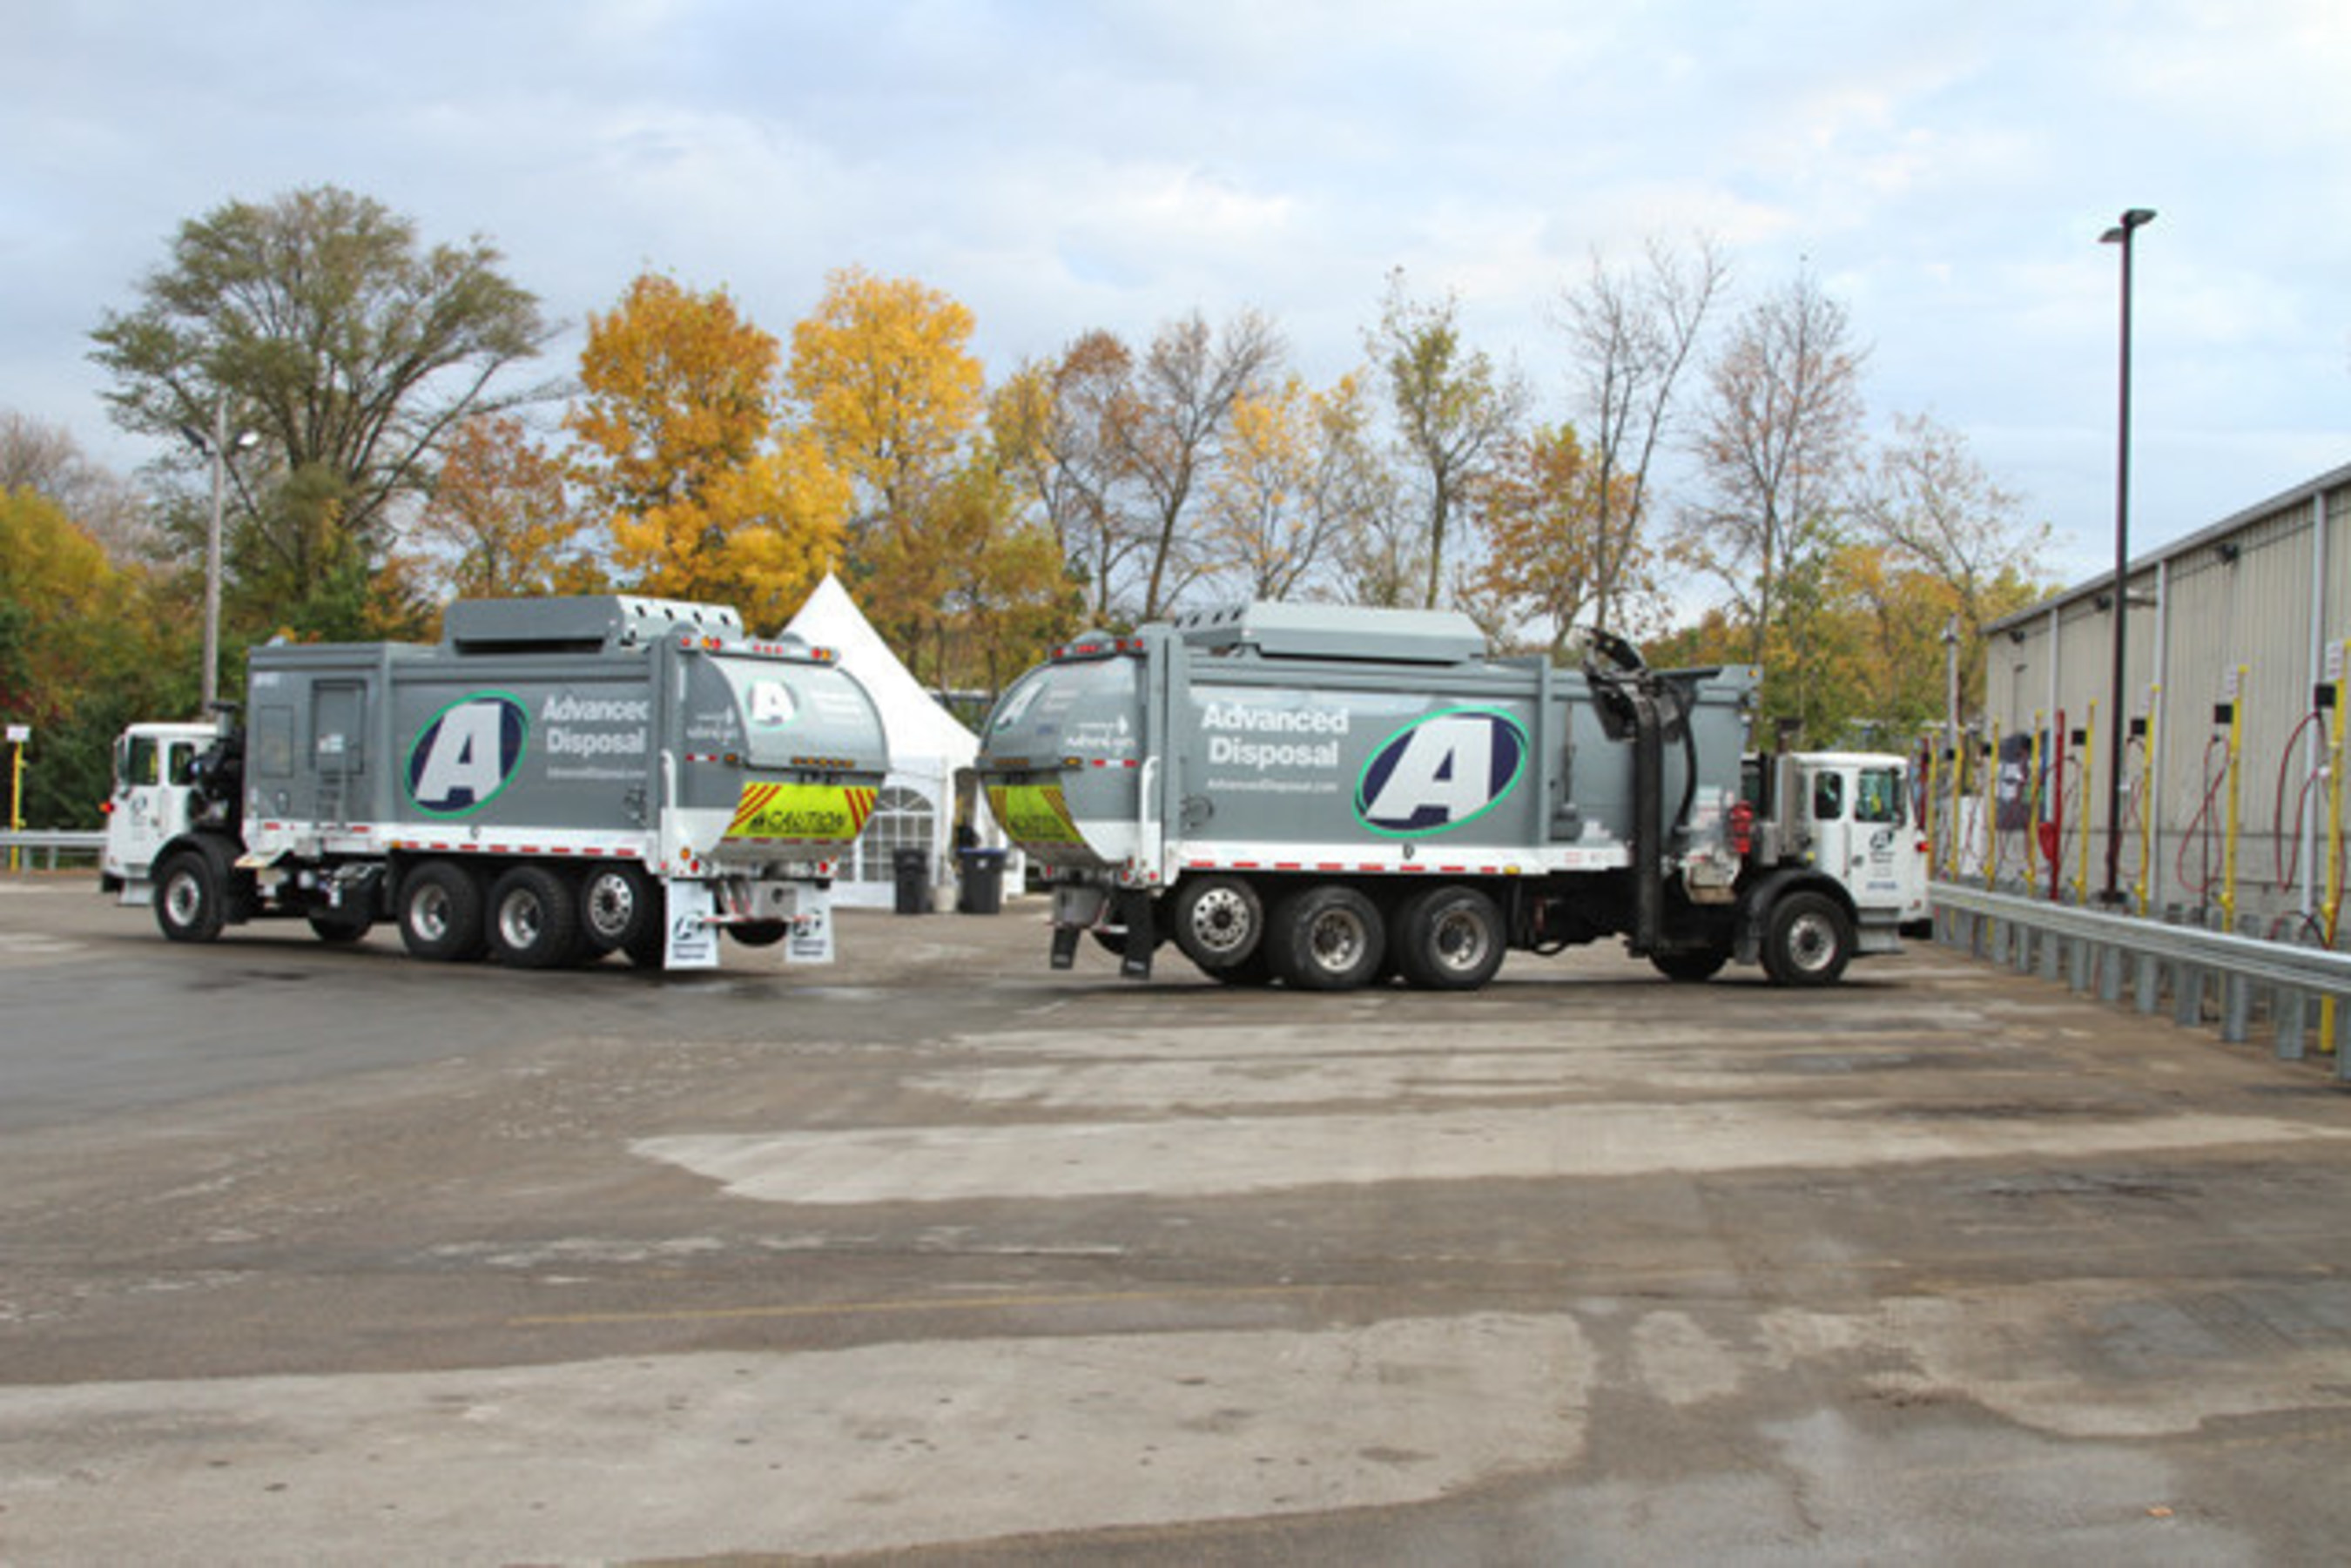 Advance Disposal's new CNG fueling station built by TruStar Energy in Hartland, Wisconsin.